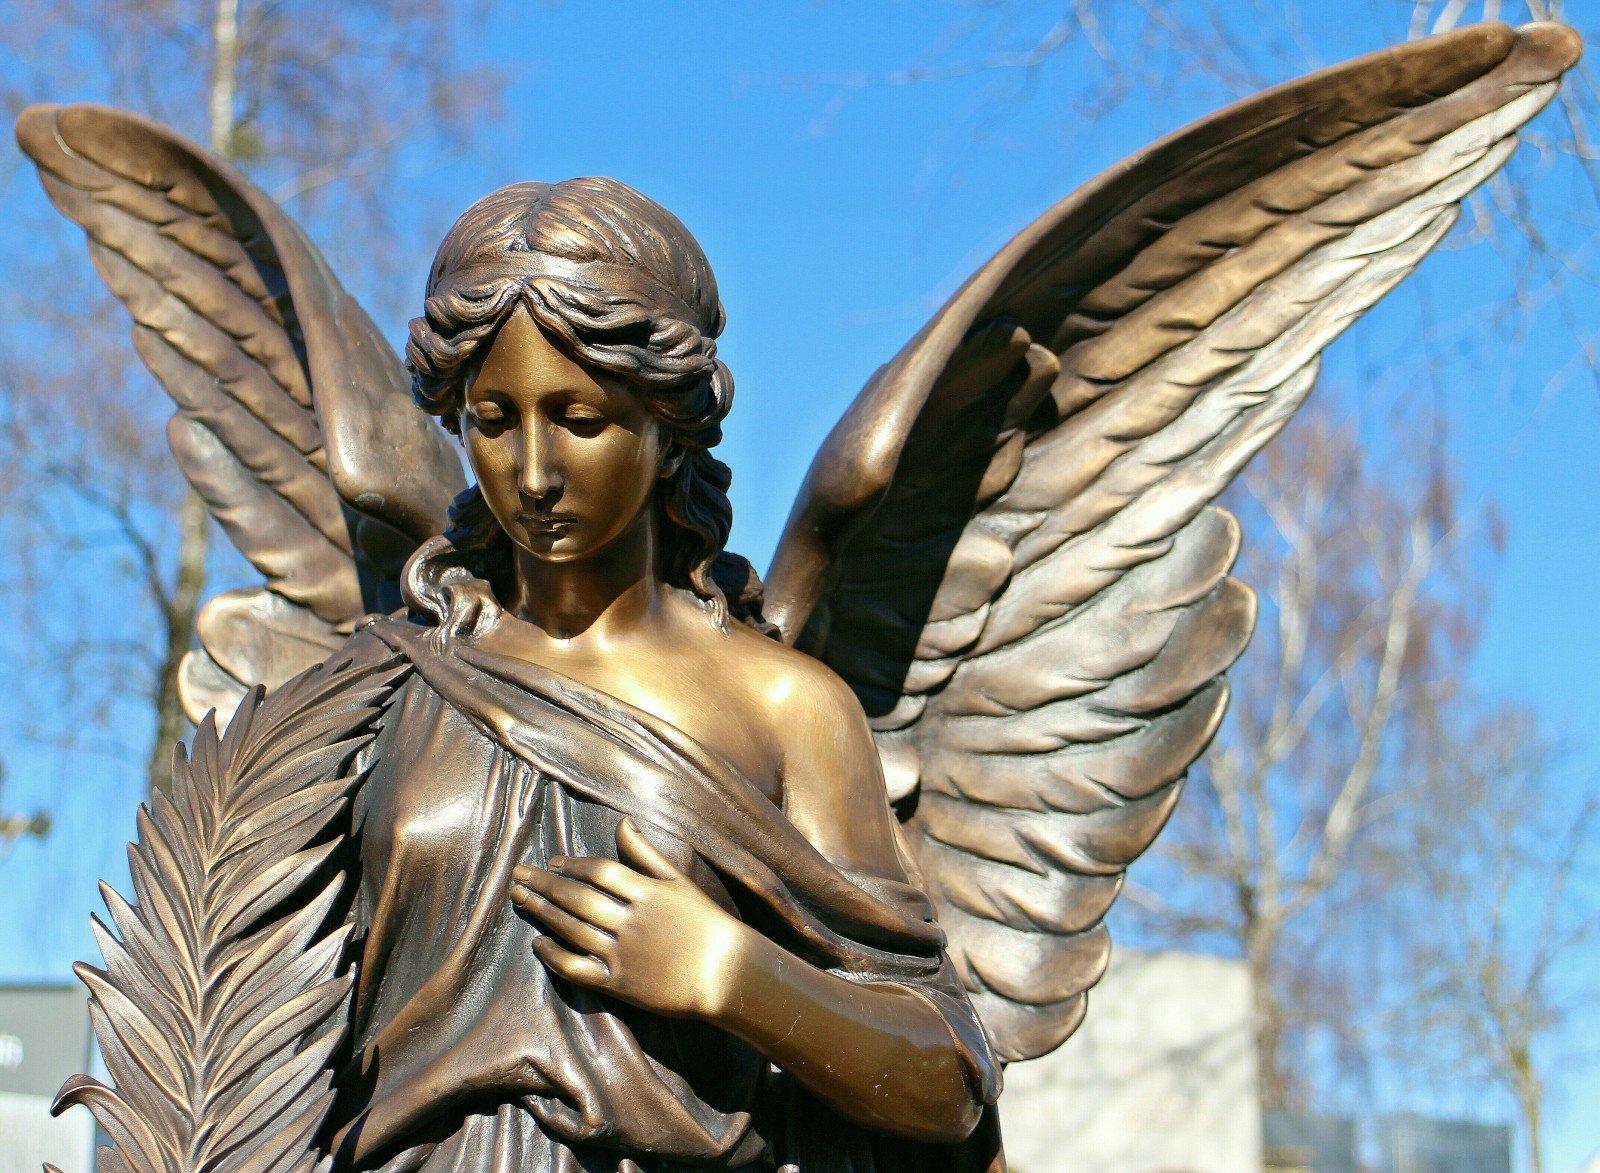 Statue sculpture bronze angel harmony fig wing 1 photo on visual hunt